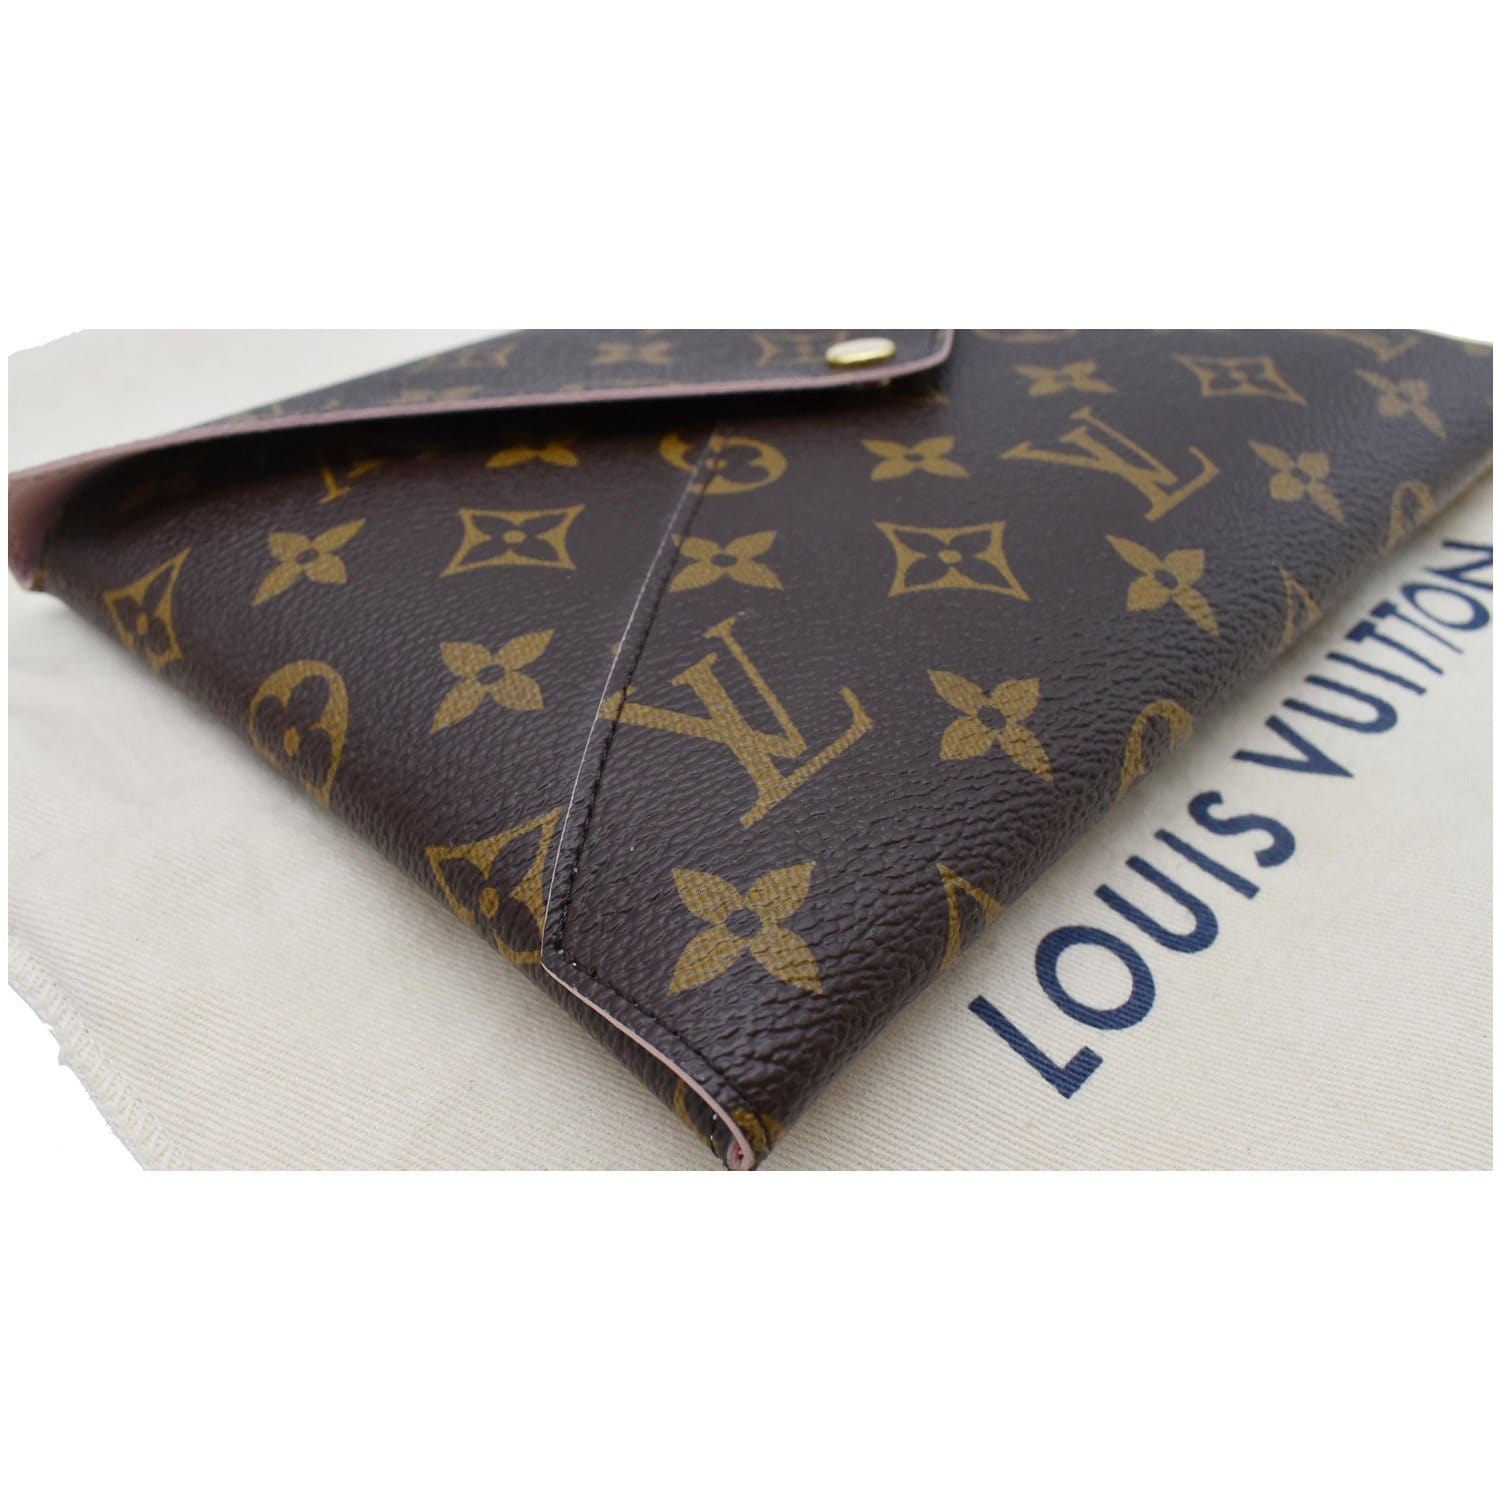 Louis Vuitton, Bags, Louis Vuitton Large Kirigami Pouch With Dustbag